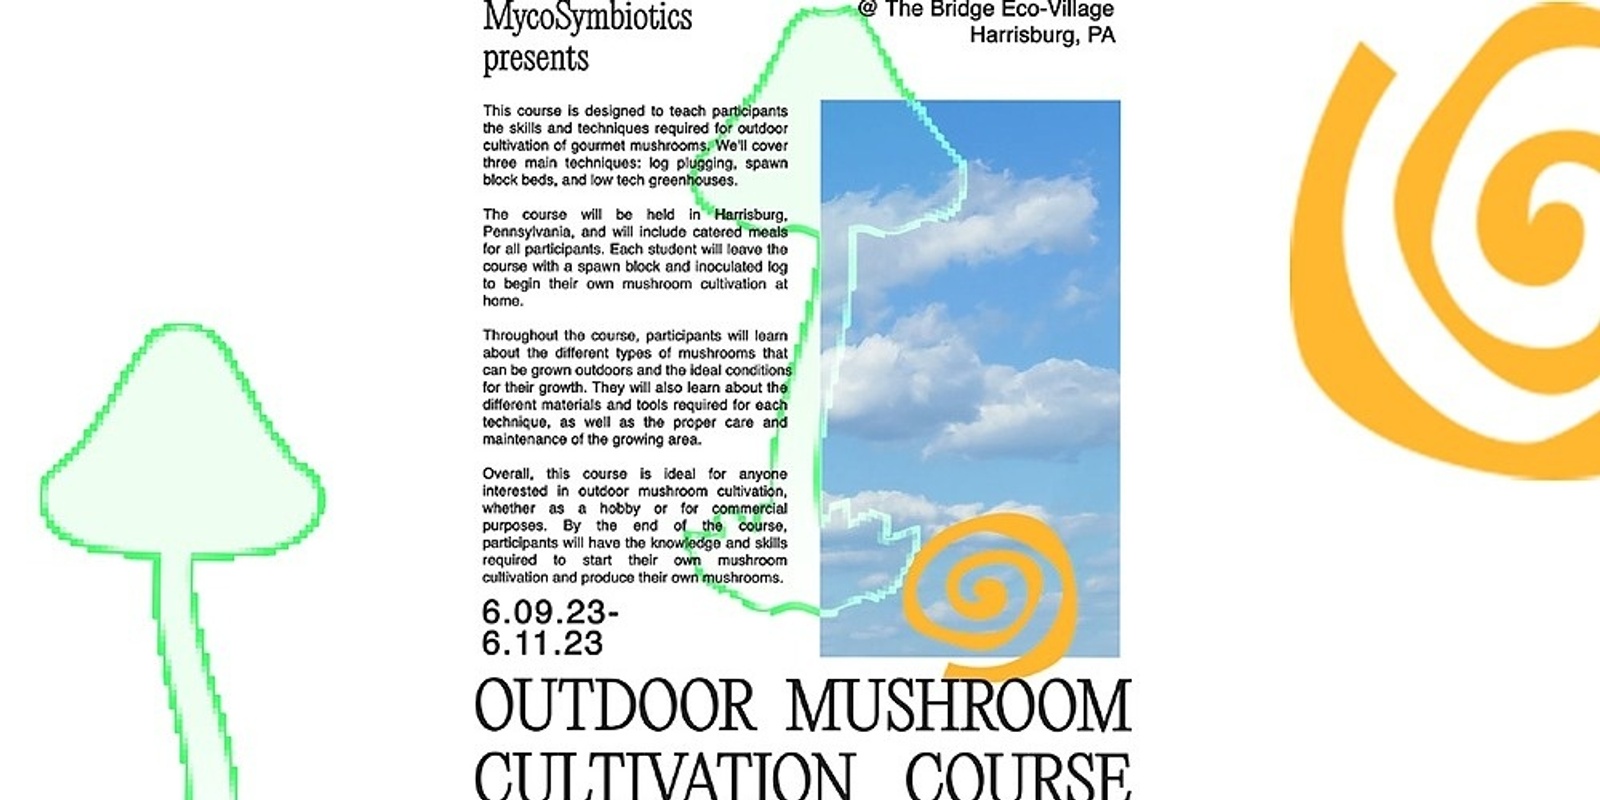 Banner image for MycoSymbiotics' Outdoor Mushroom Cultivation Course